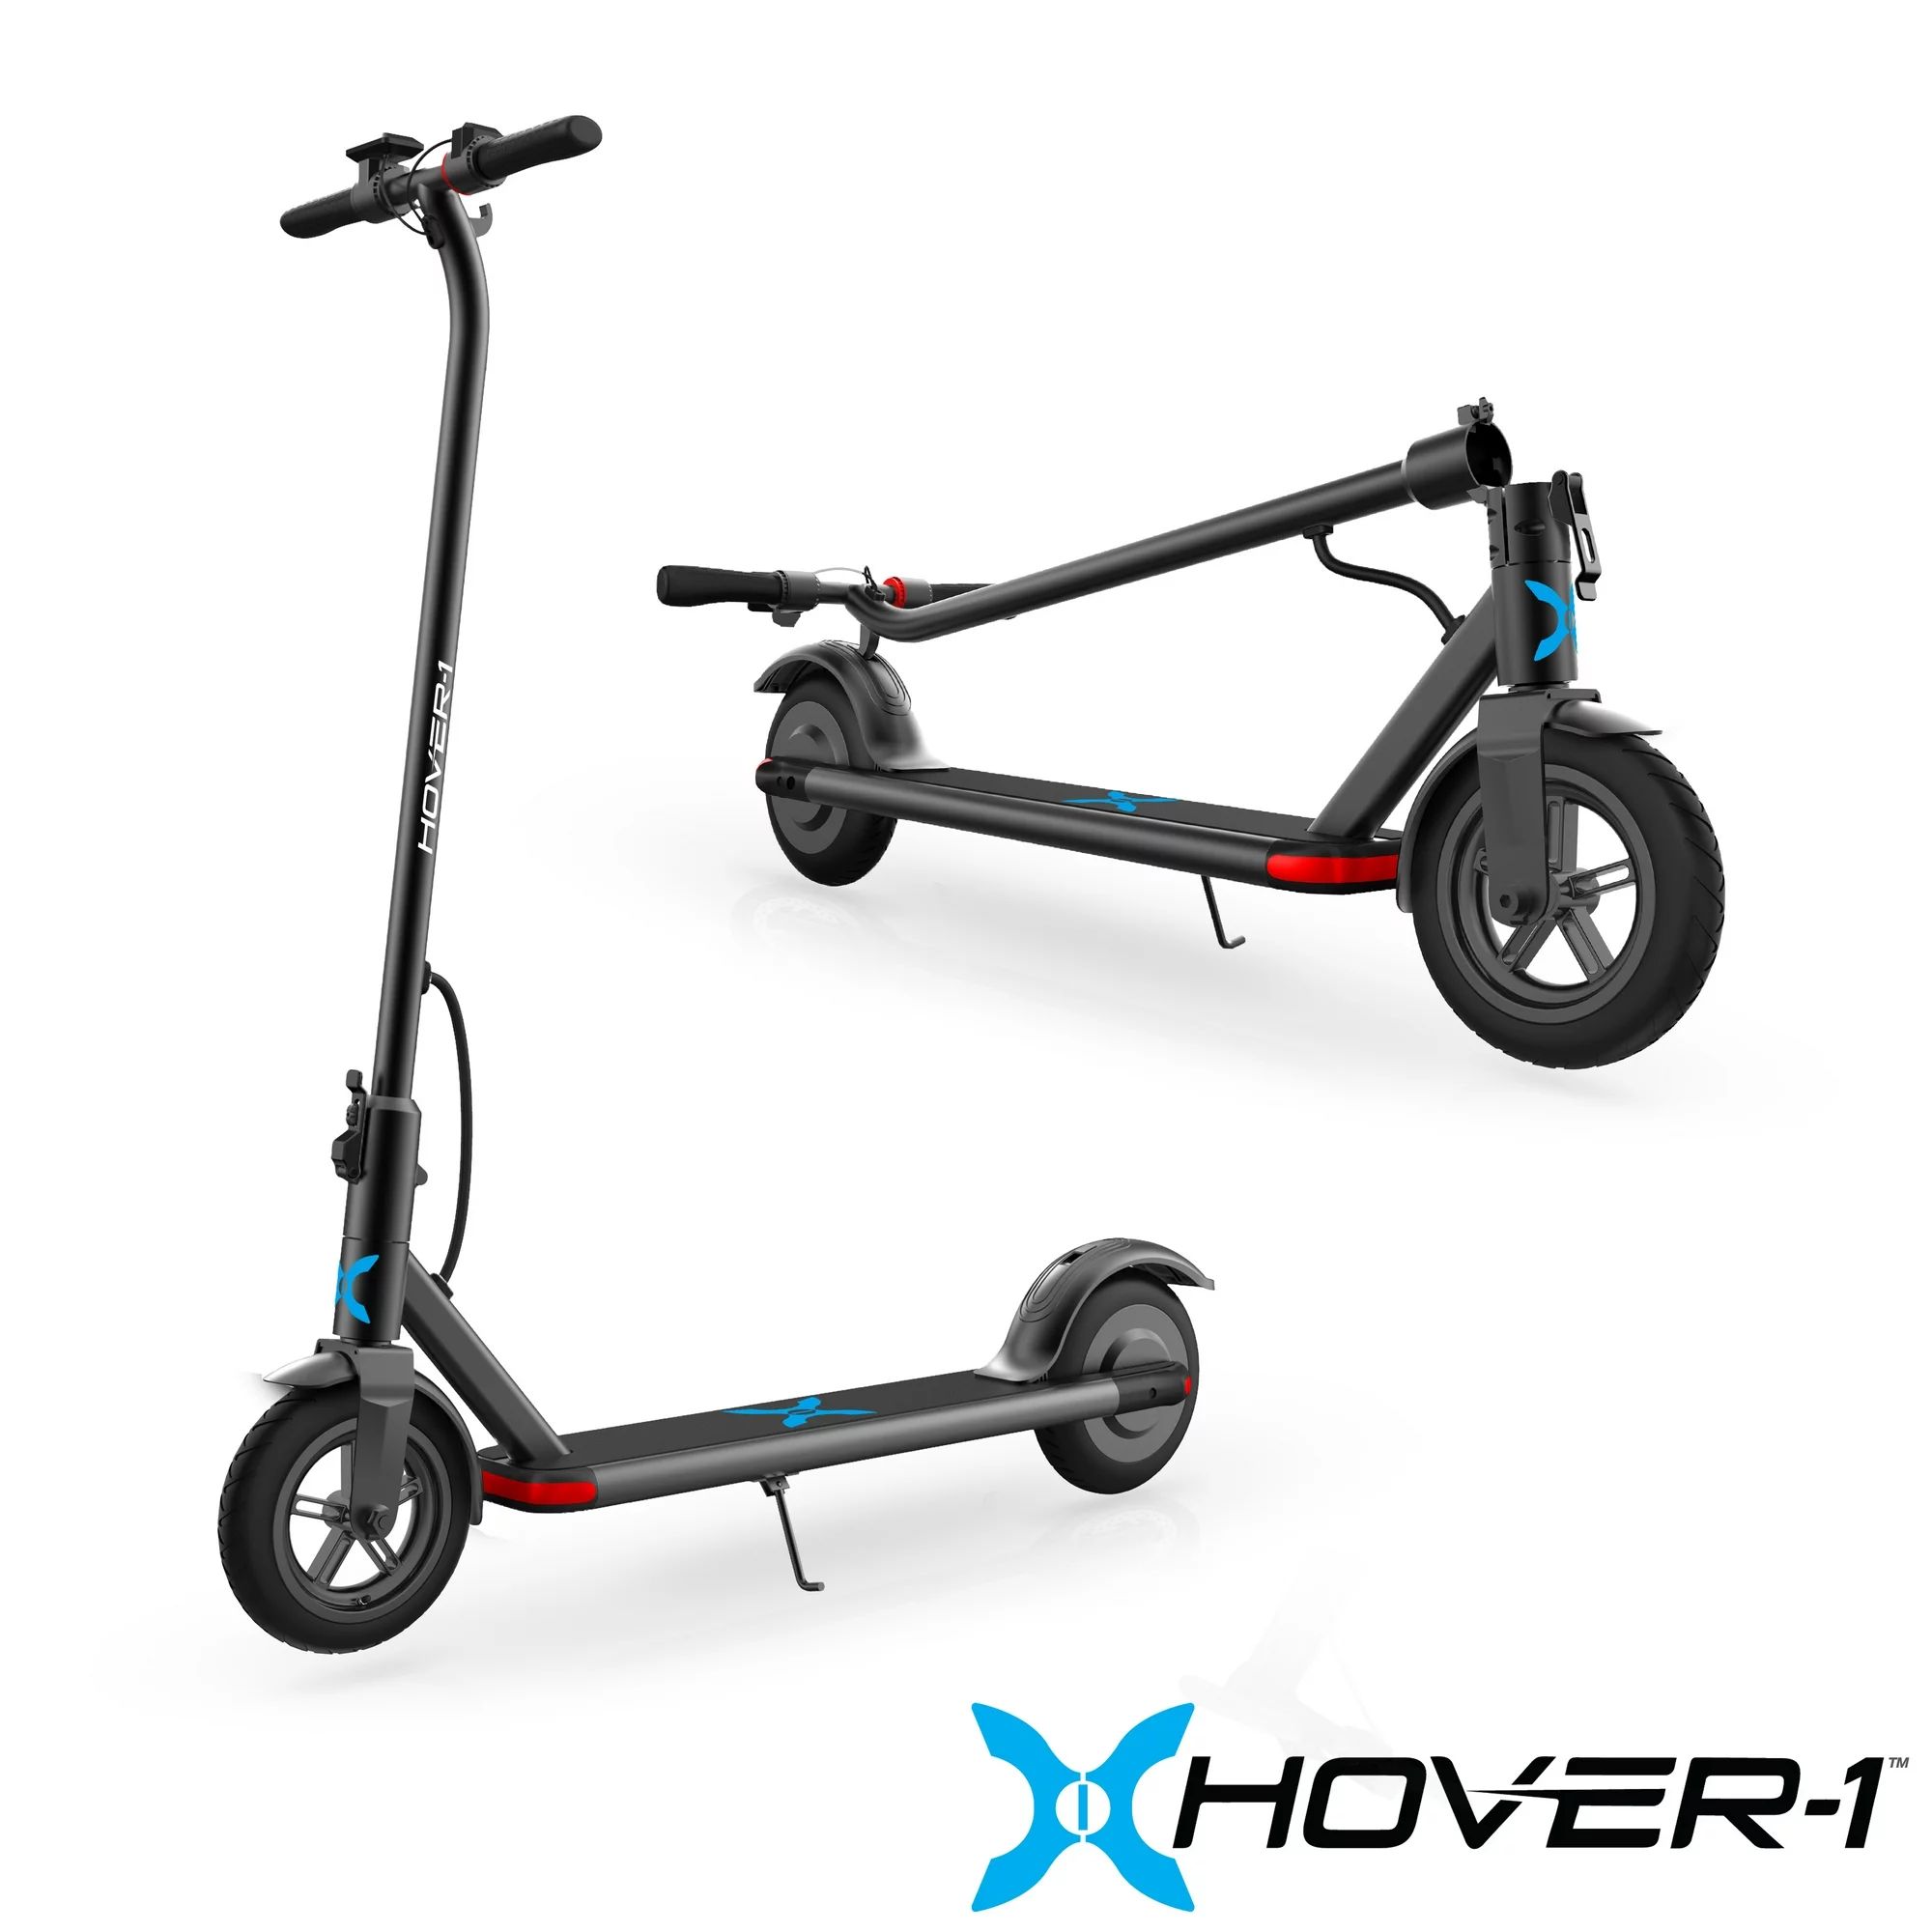 Hover-1 Dynamo Electric Folding Scooter, LCD Display, Air-Filled Tires, 16 MPH Max Speed - Black | Walmart (US)